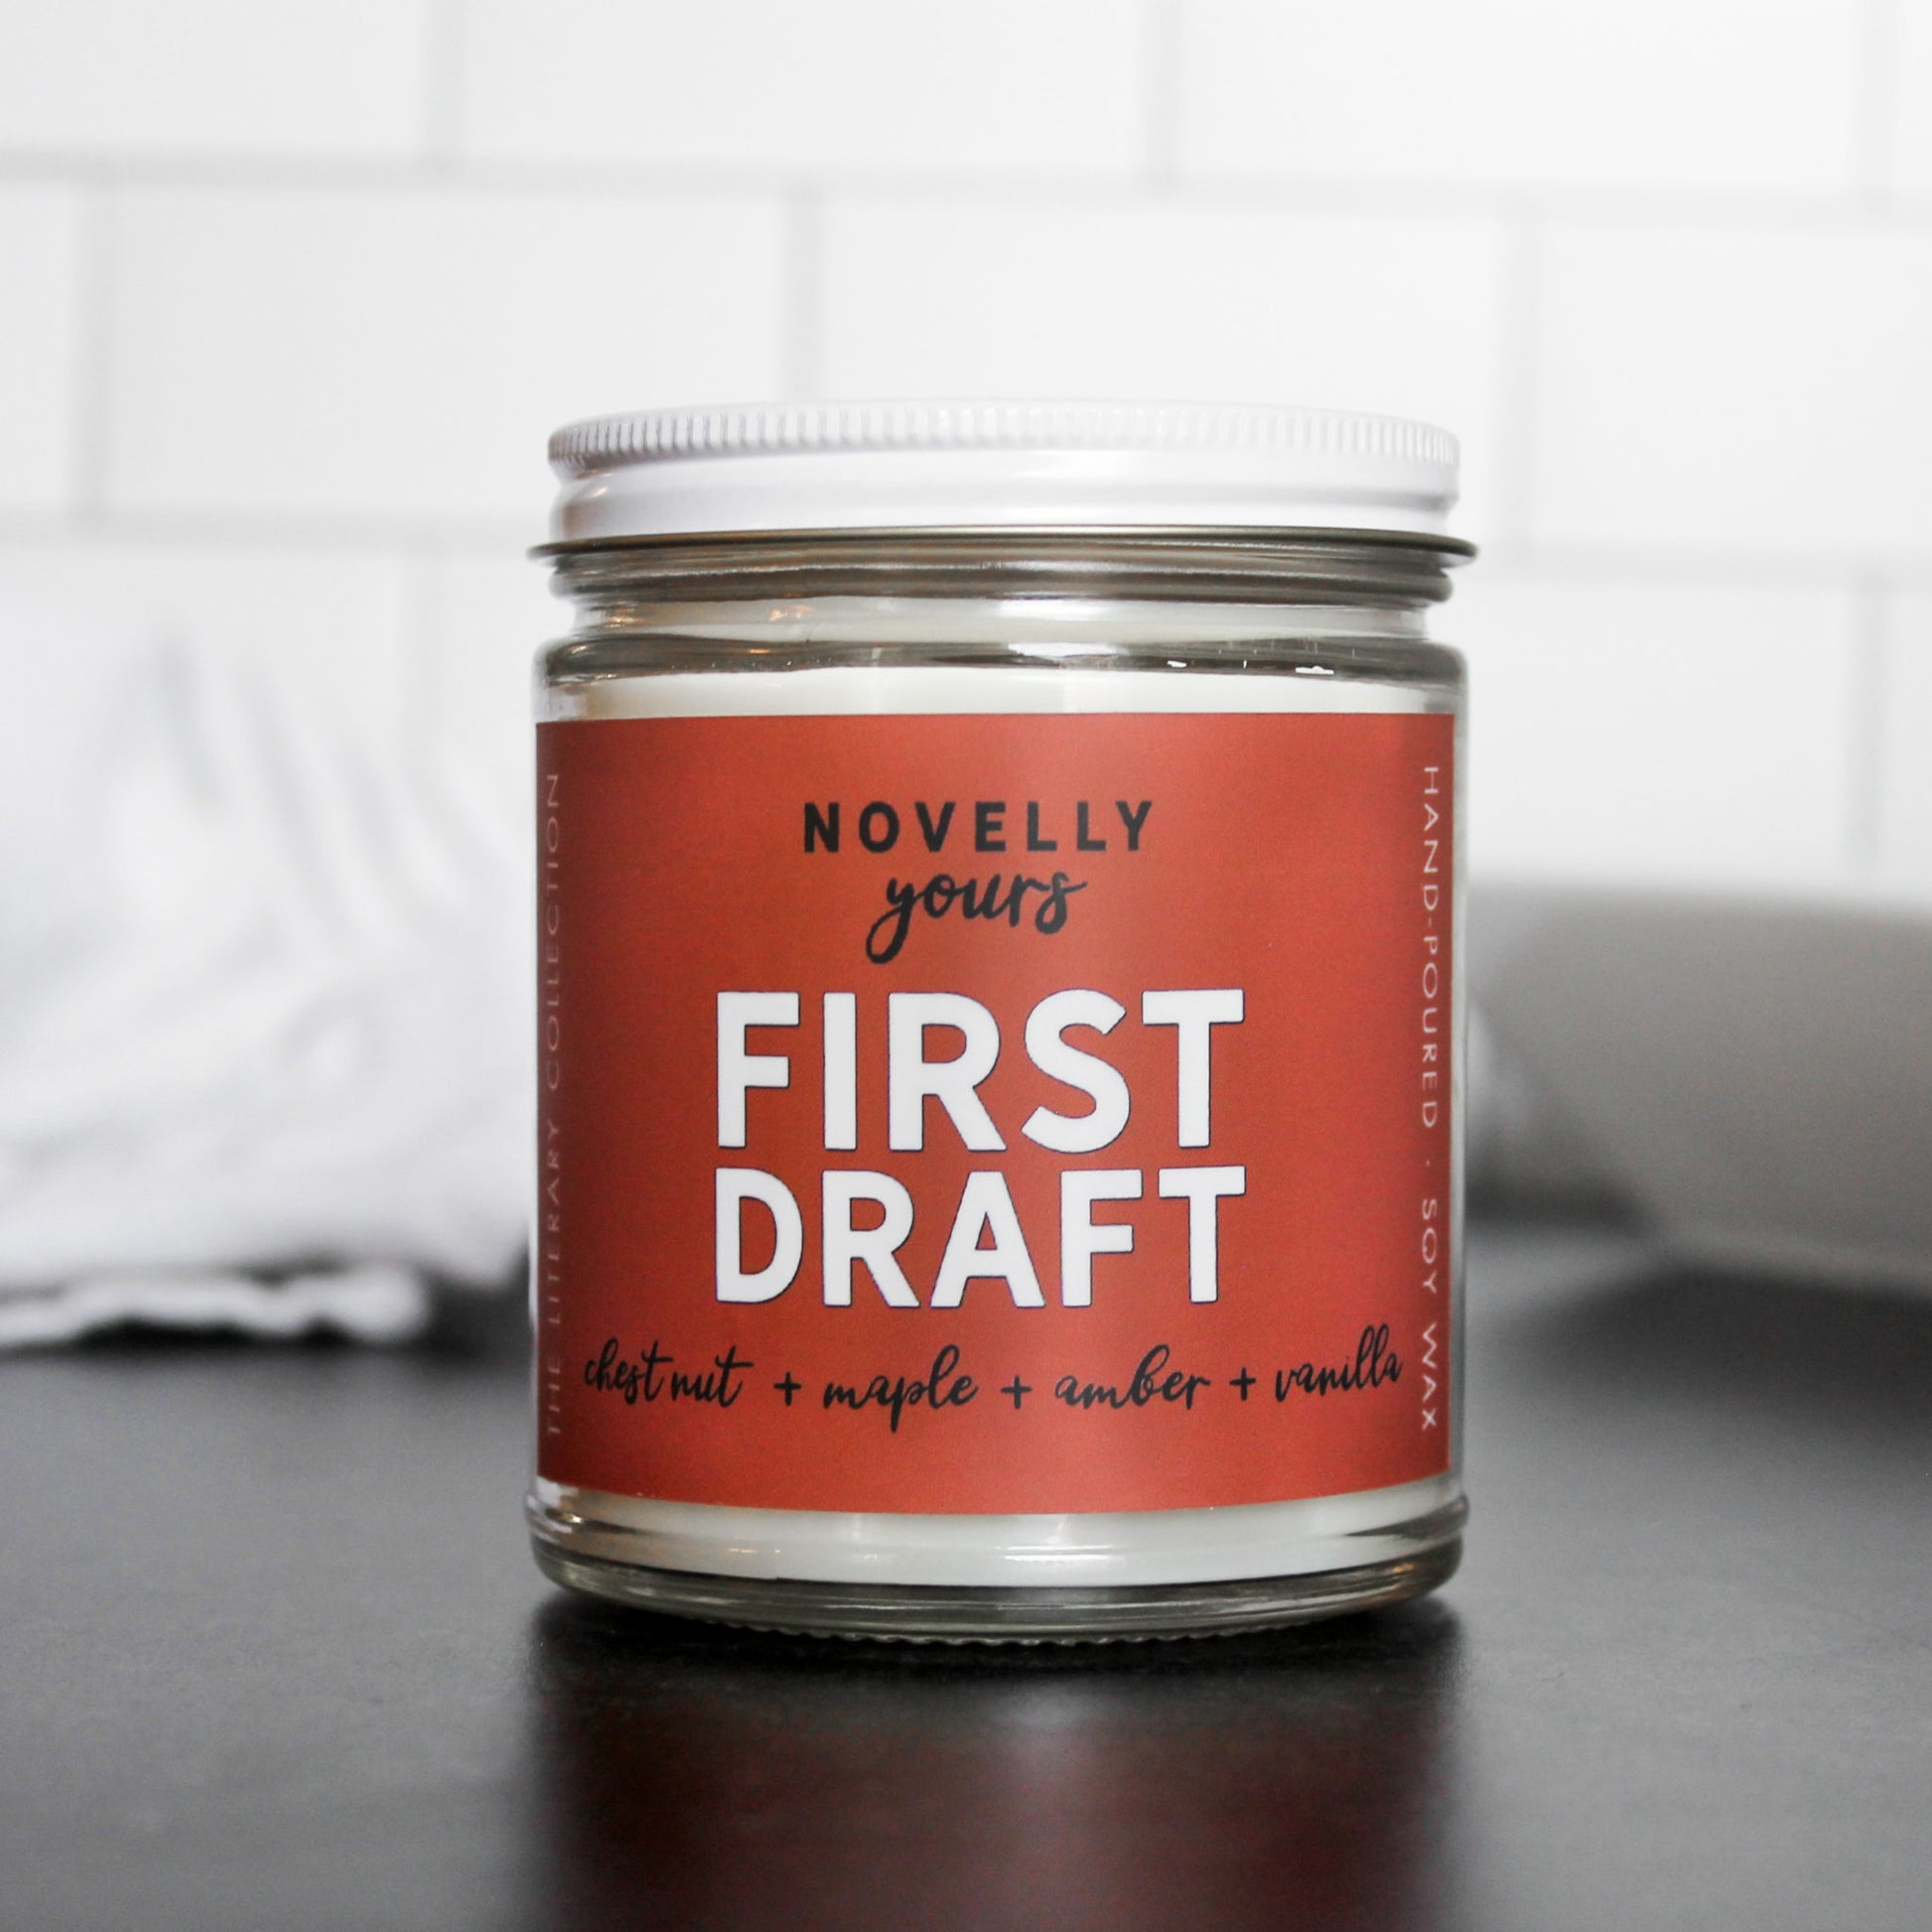 writing inspired scented candle called "First Draft" with Burnt orange label